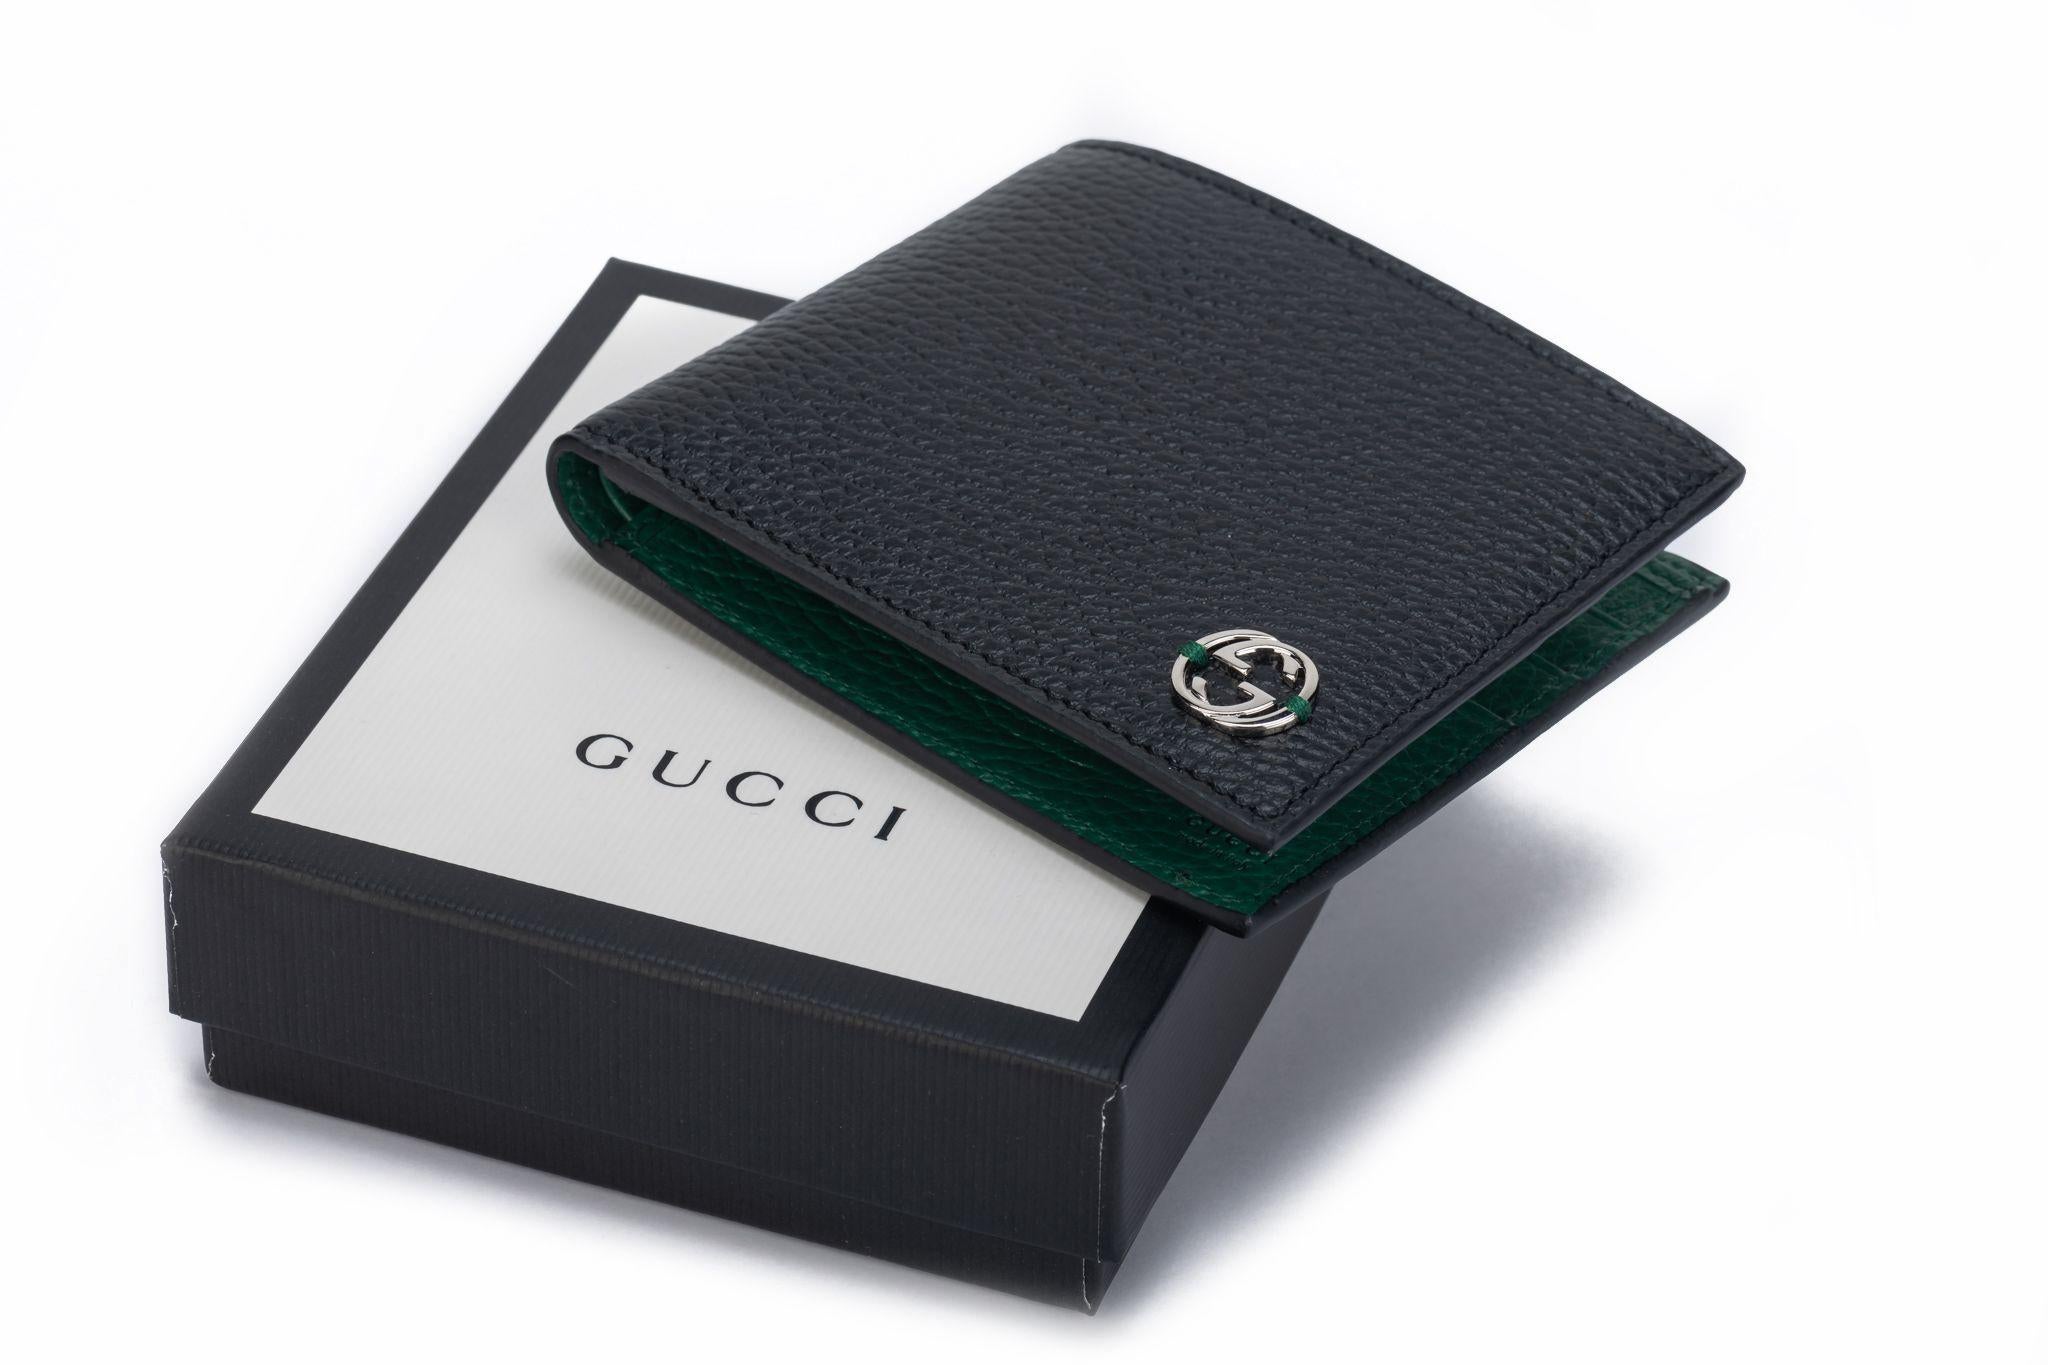 Gucci new black leather bifold wallet with green interior and silver tone logo. Comes with original dust cover and box.